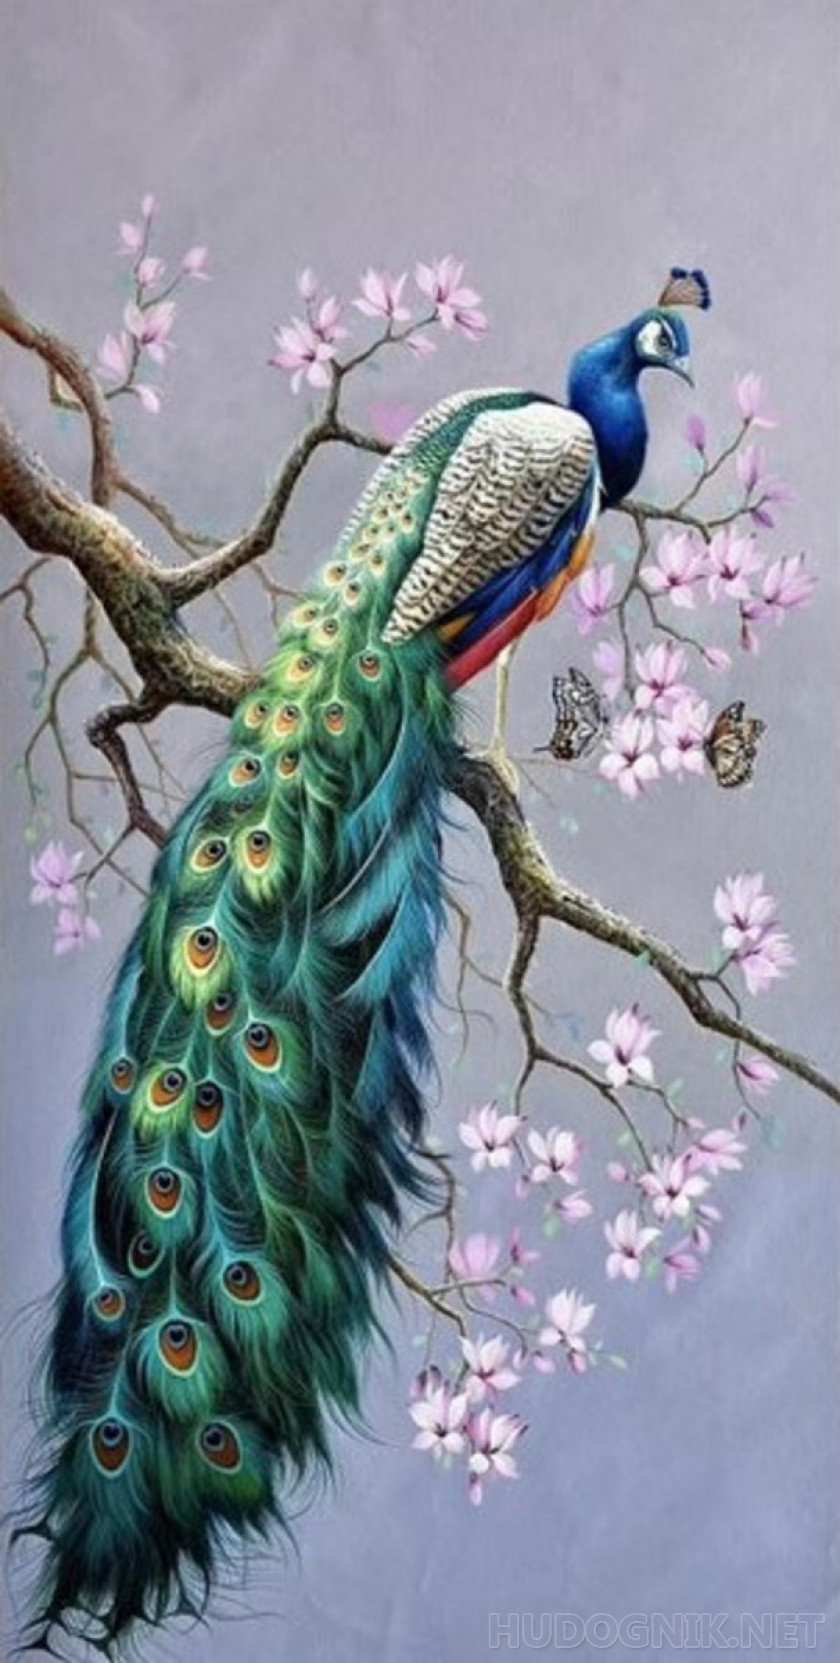 Peacock on a branch